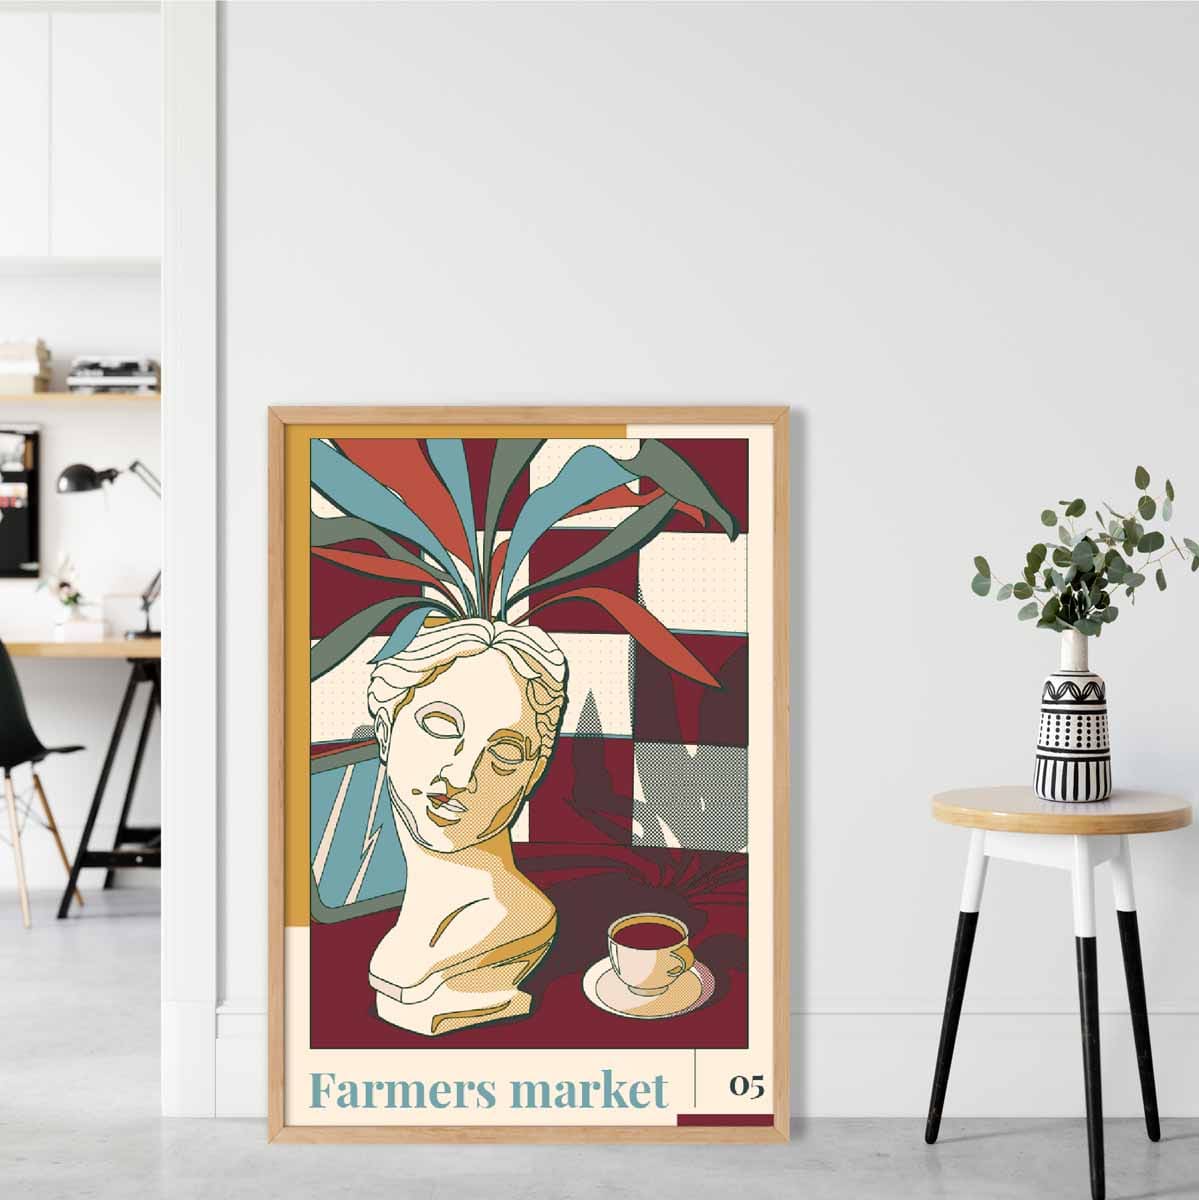 Farmers Market Poster No 5 in Damson Red and Blue